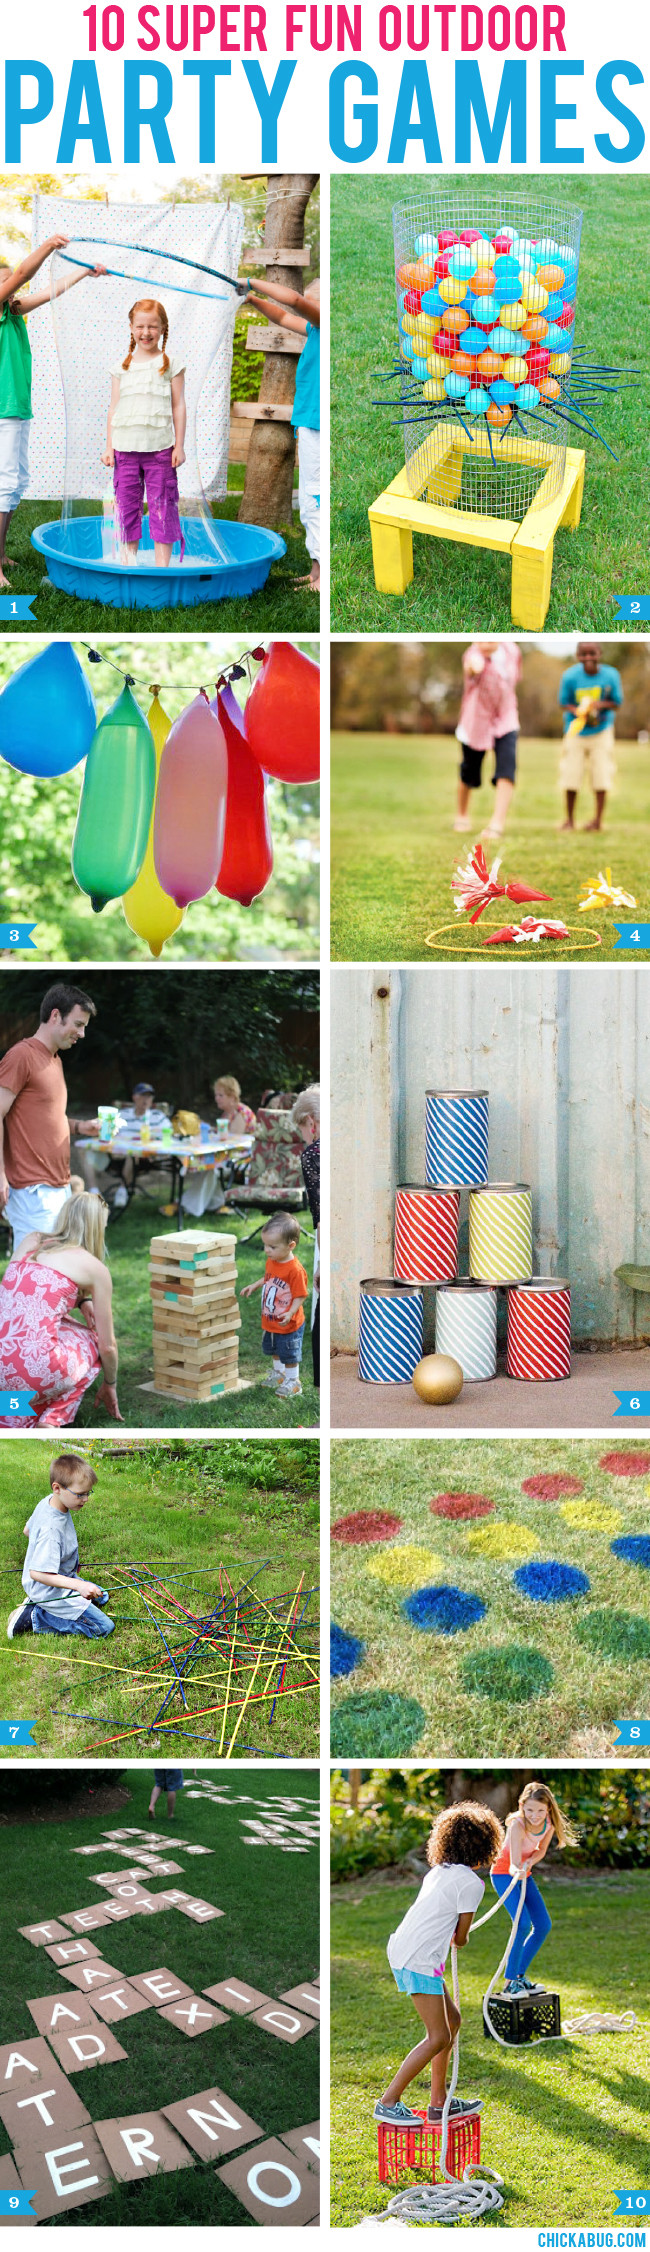 Summer Party Game Ideas
 10 super fun outdoor party games